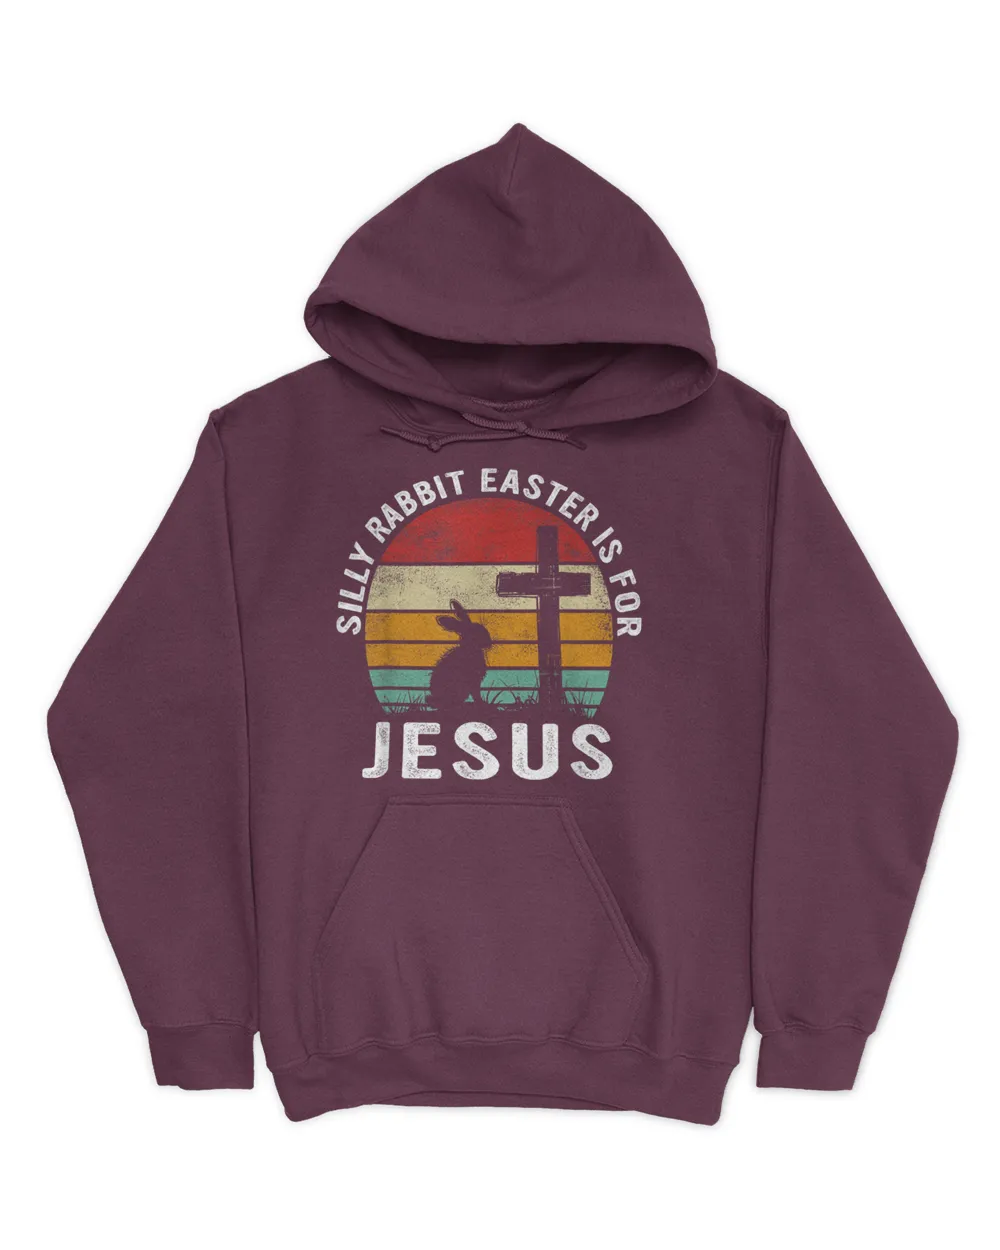 Silly Rabbit Easter Is For Jesus Religious Happy Easter Day T-Shirt